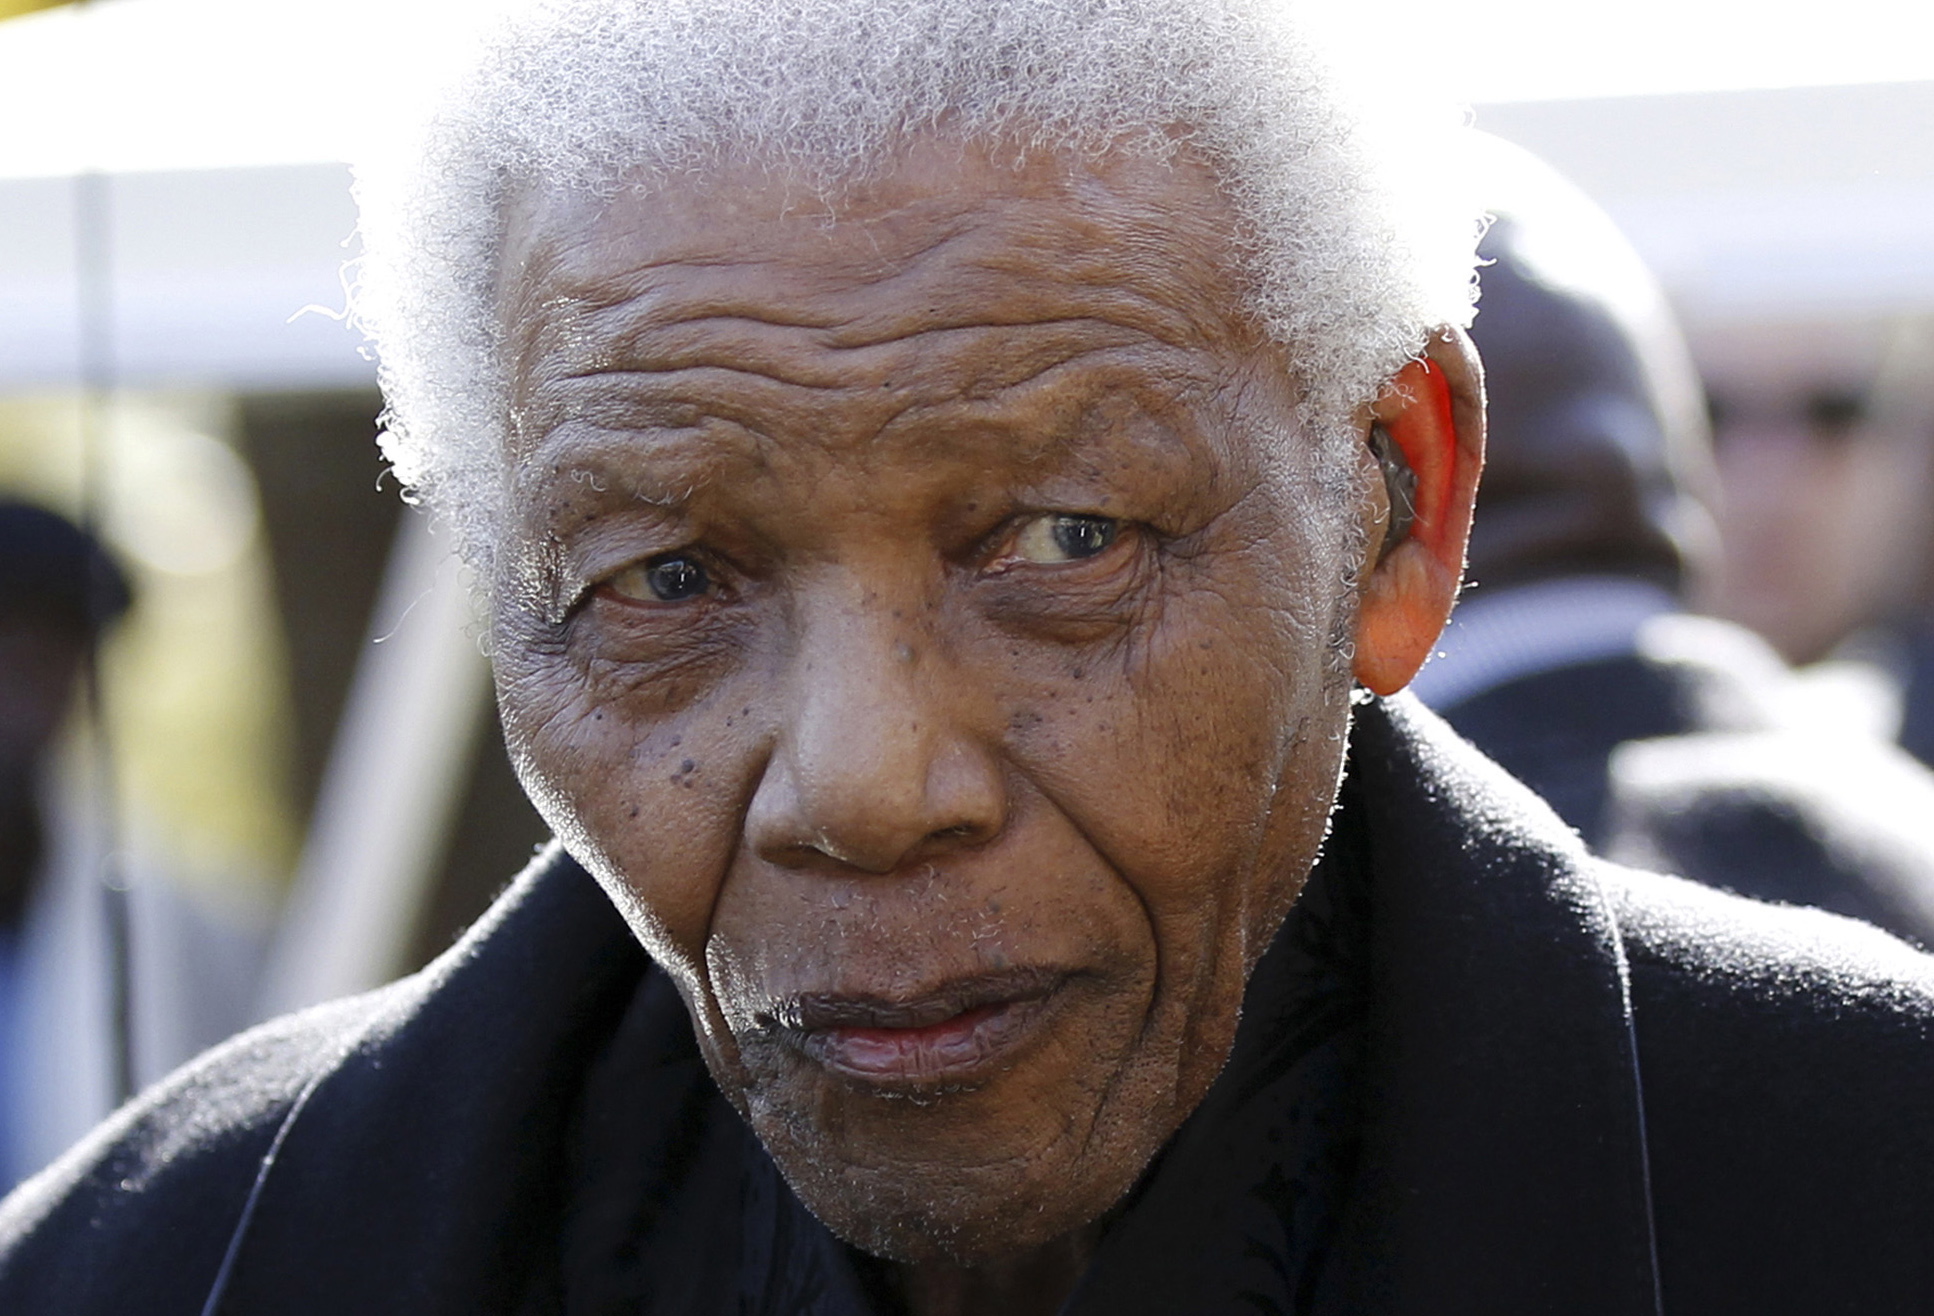 Former South African President Nelson Mandela leaves the chapel after attending the funeral of his great-granddaughter Zenani Mandela in Johannesburg, South Africa, in 2010.